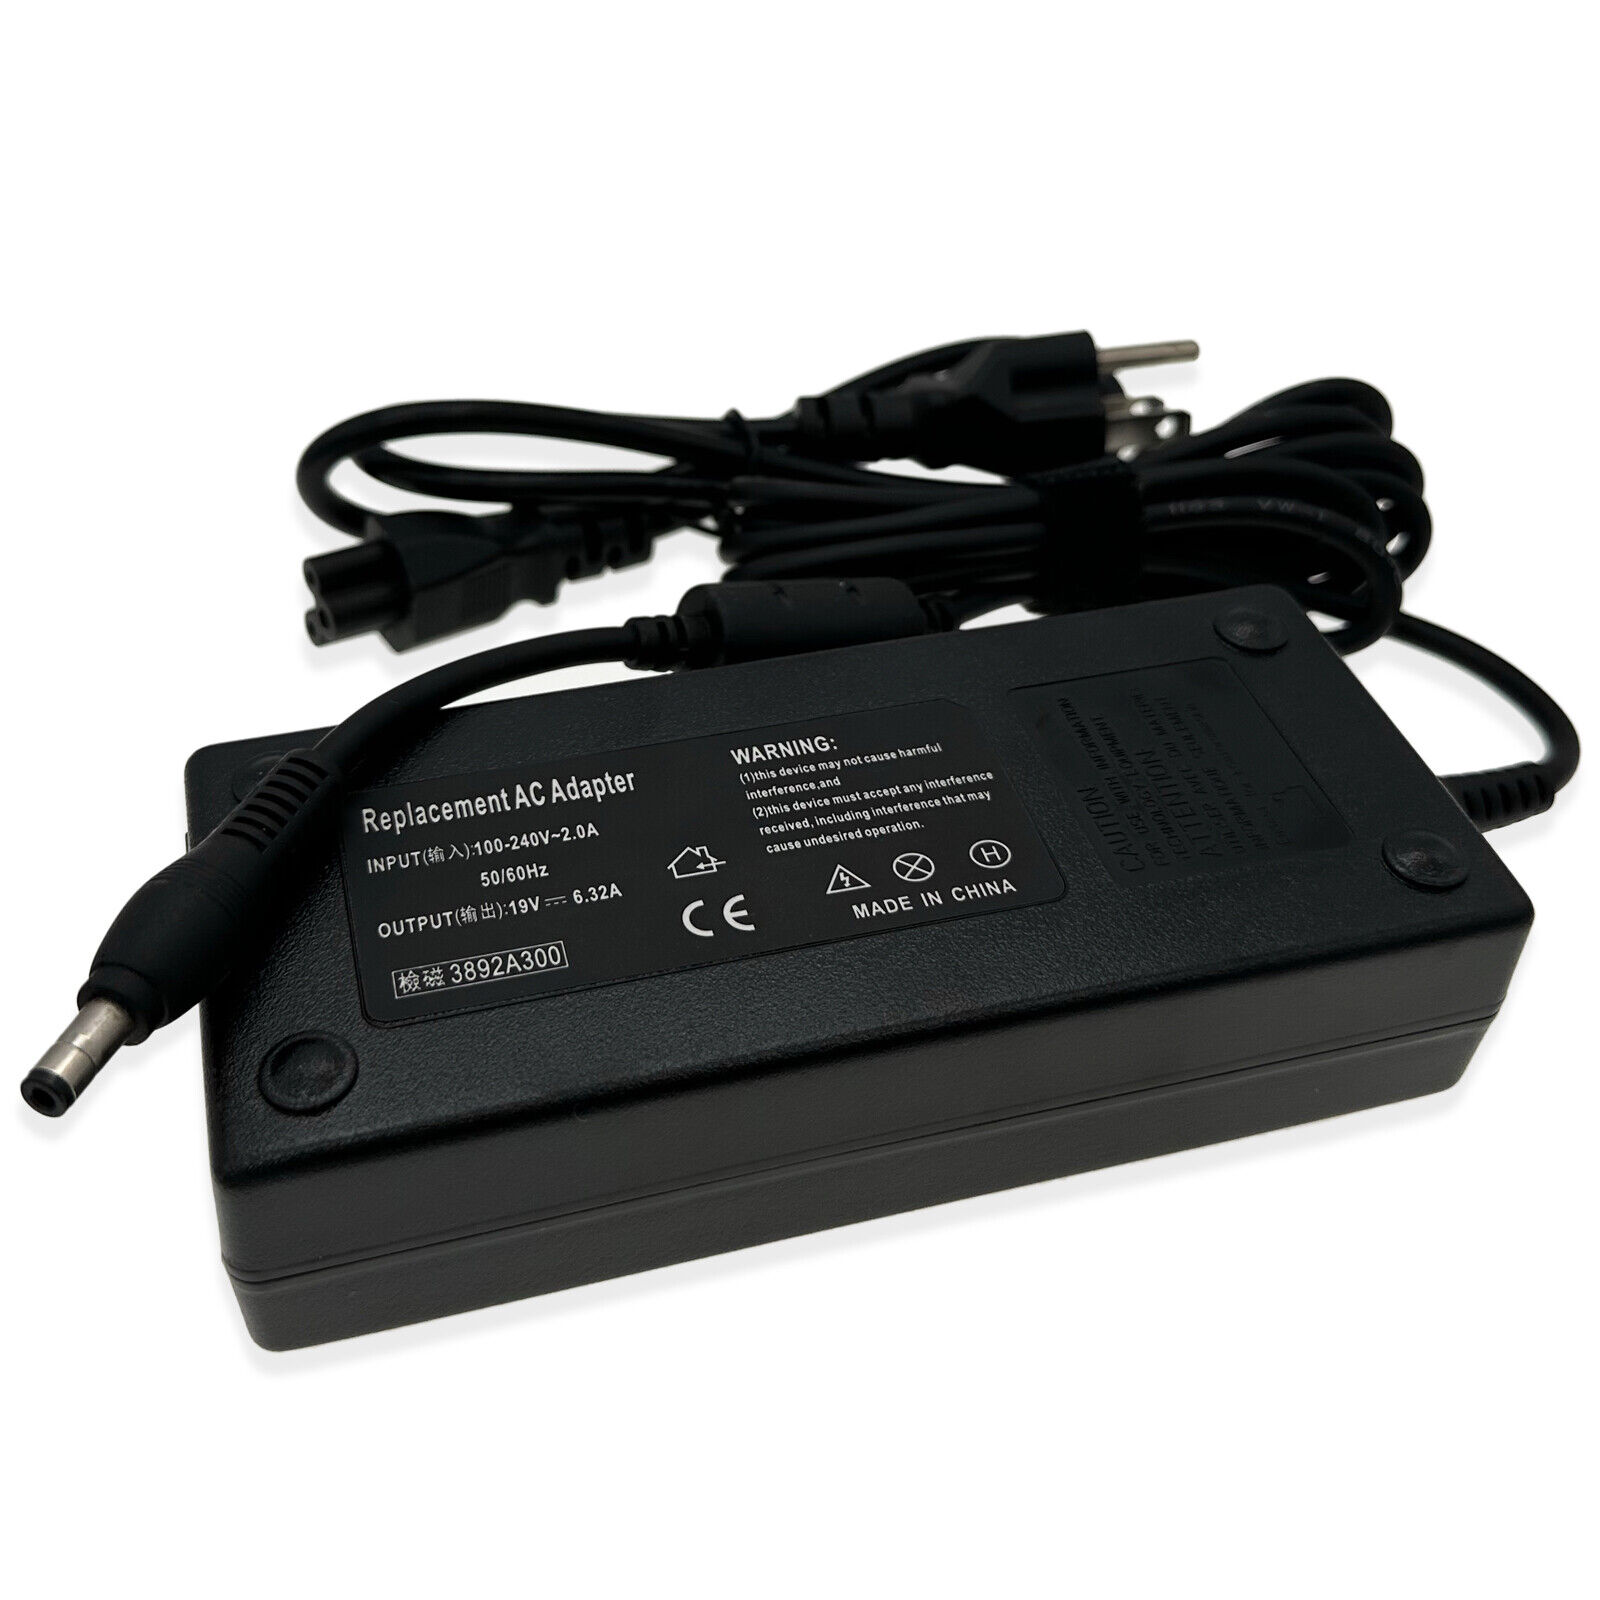 120W AC Adapter Charger for ASUS ROG GL551J GL551JW GL551JM Power Supply Cord